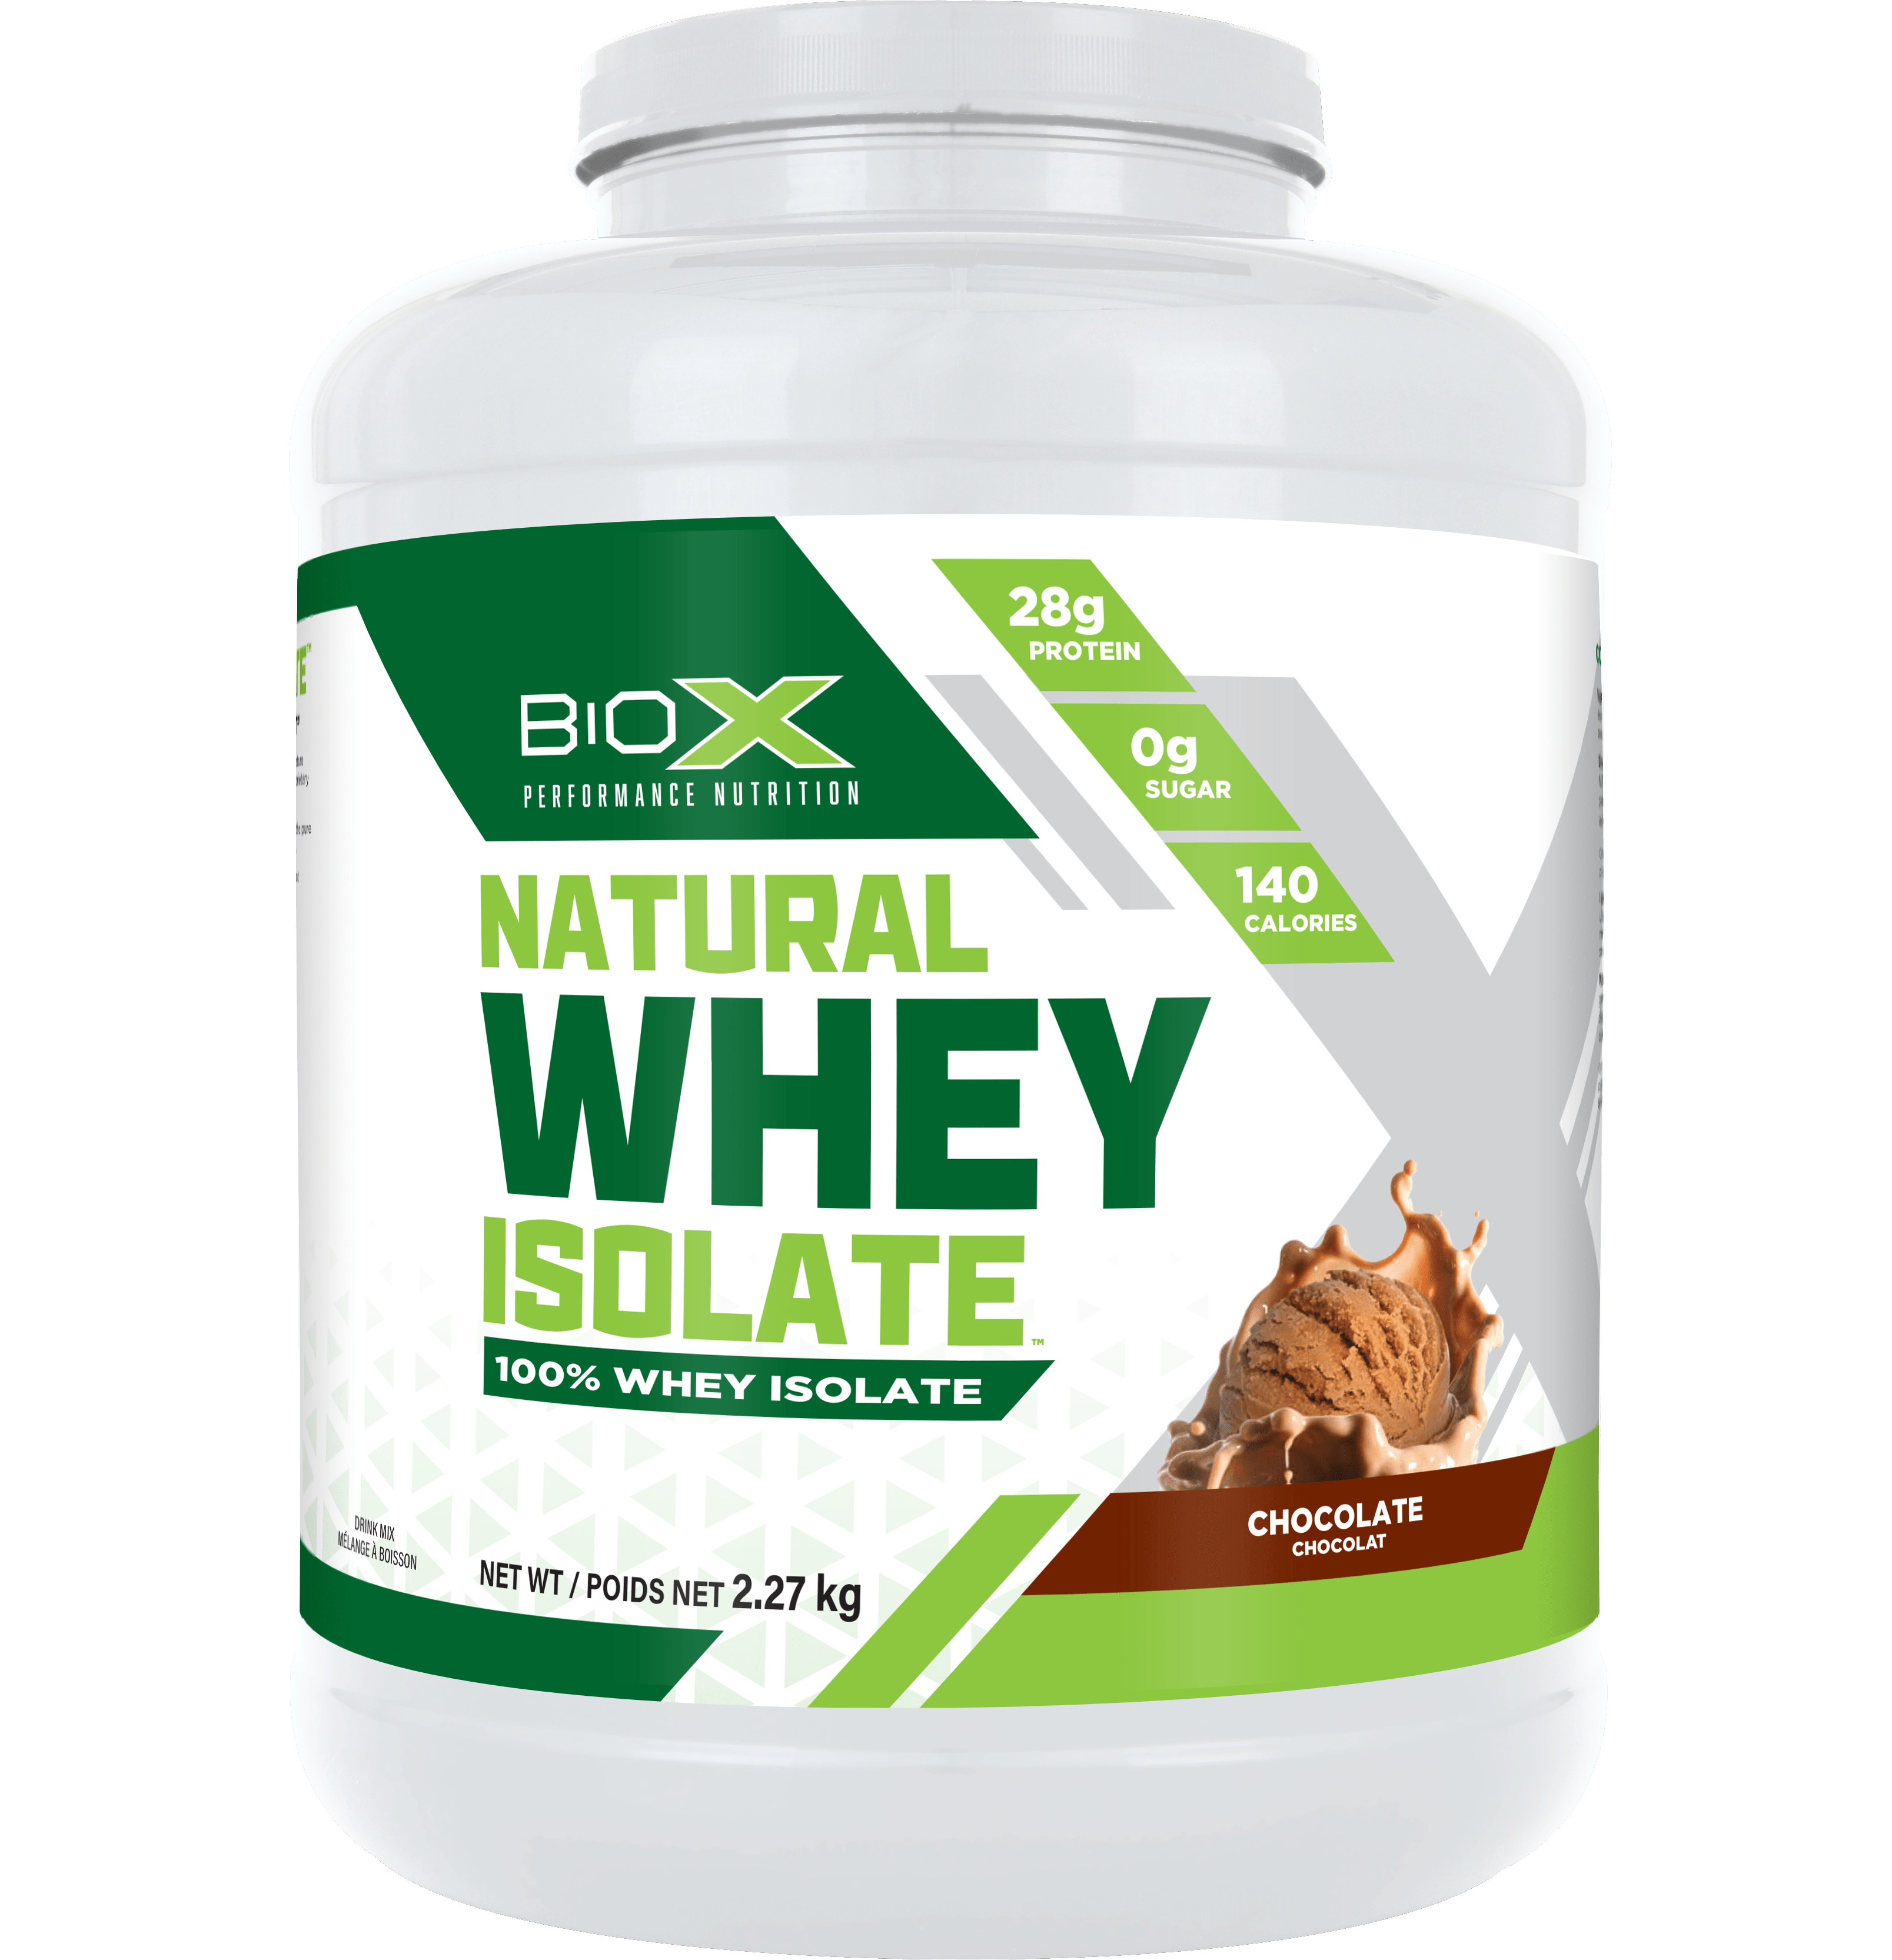 Natural Whey Isolate